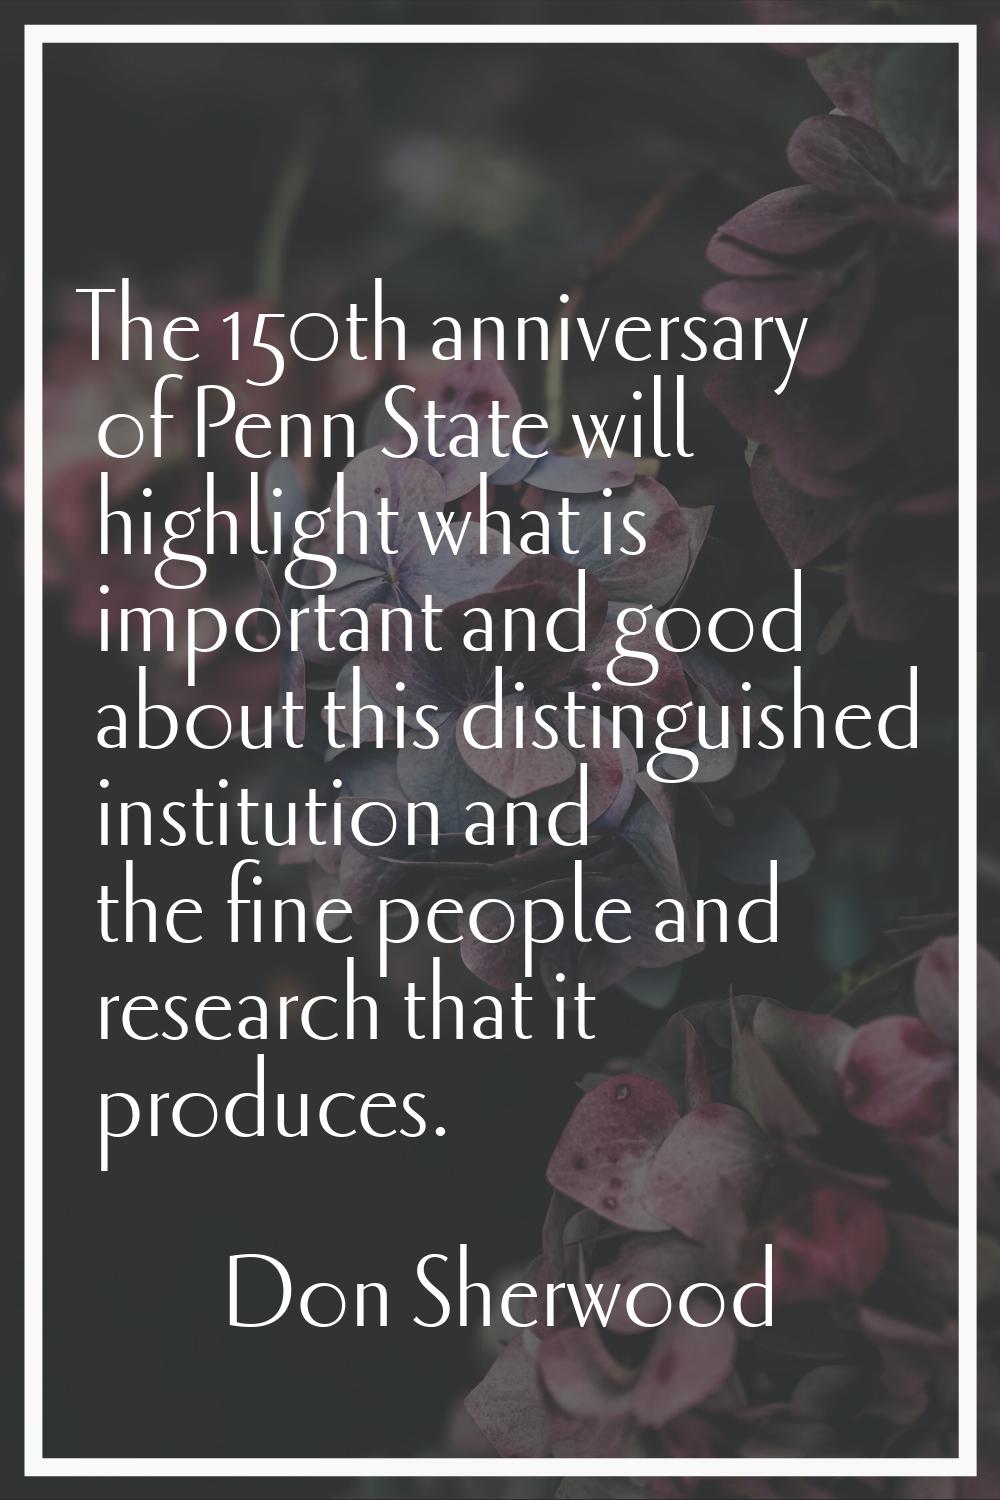 The 150th anniversary of Penn State will highlight what is important and good about this distinguis